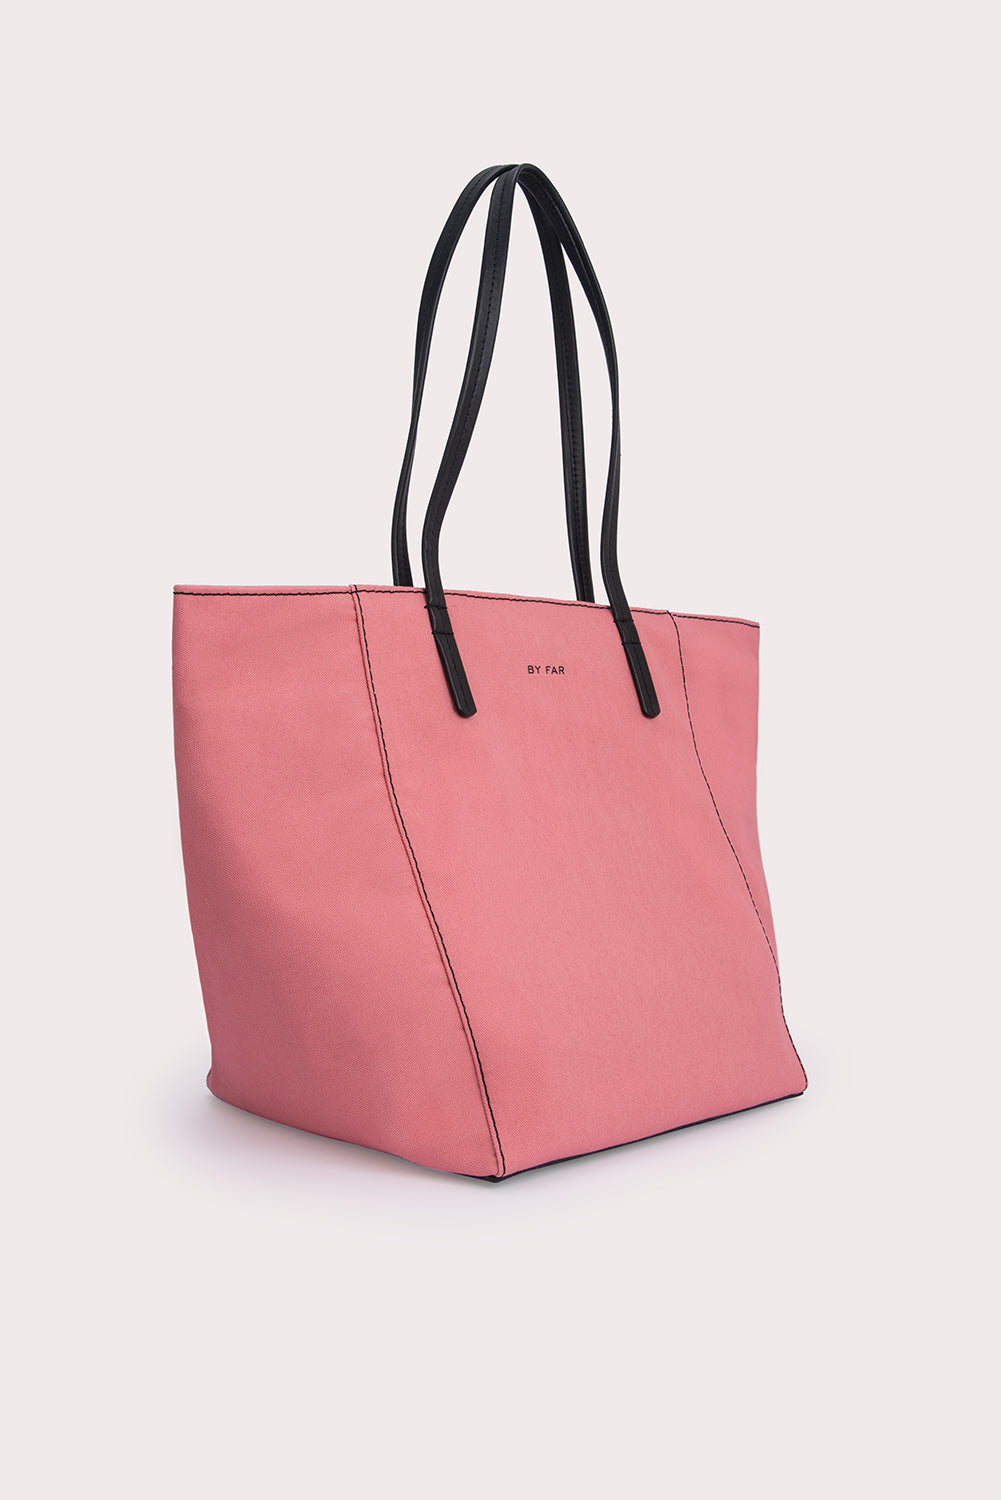 Club Tote Taffy Pink and Black Canvas and Nappa Leather